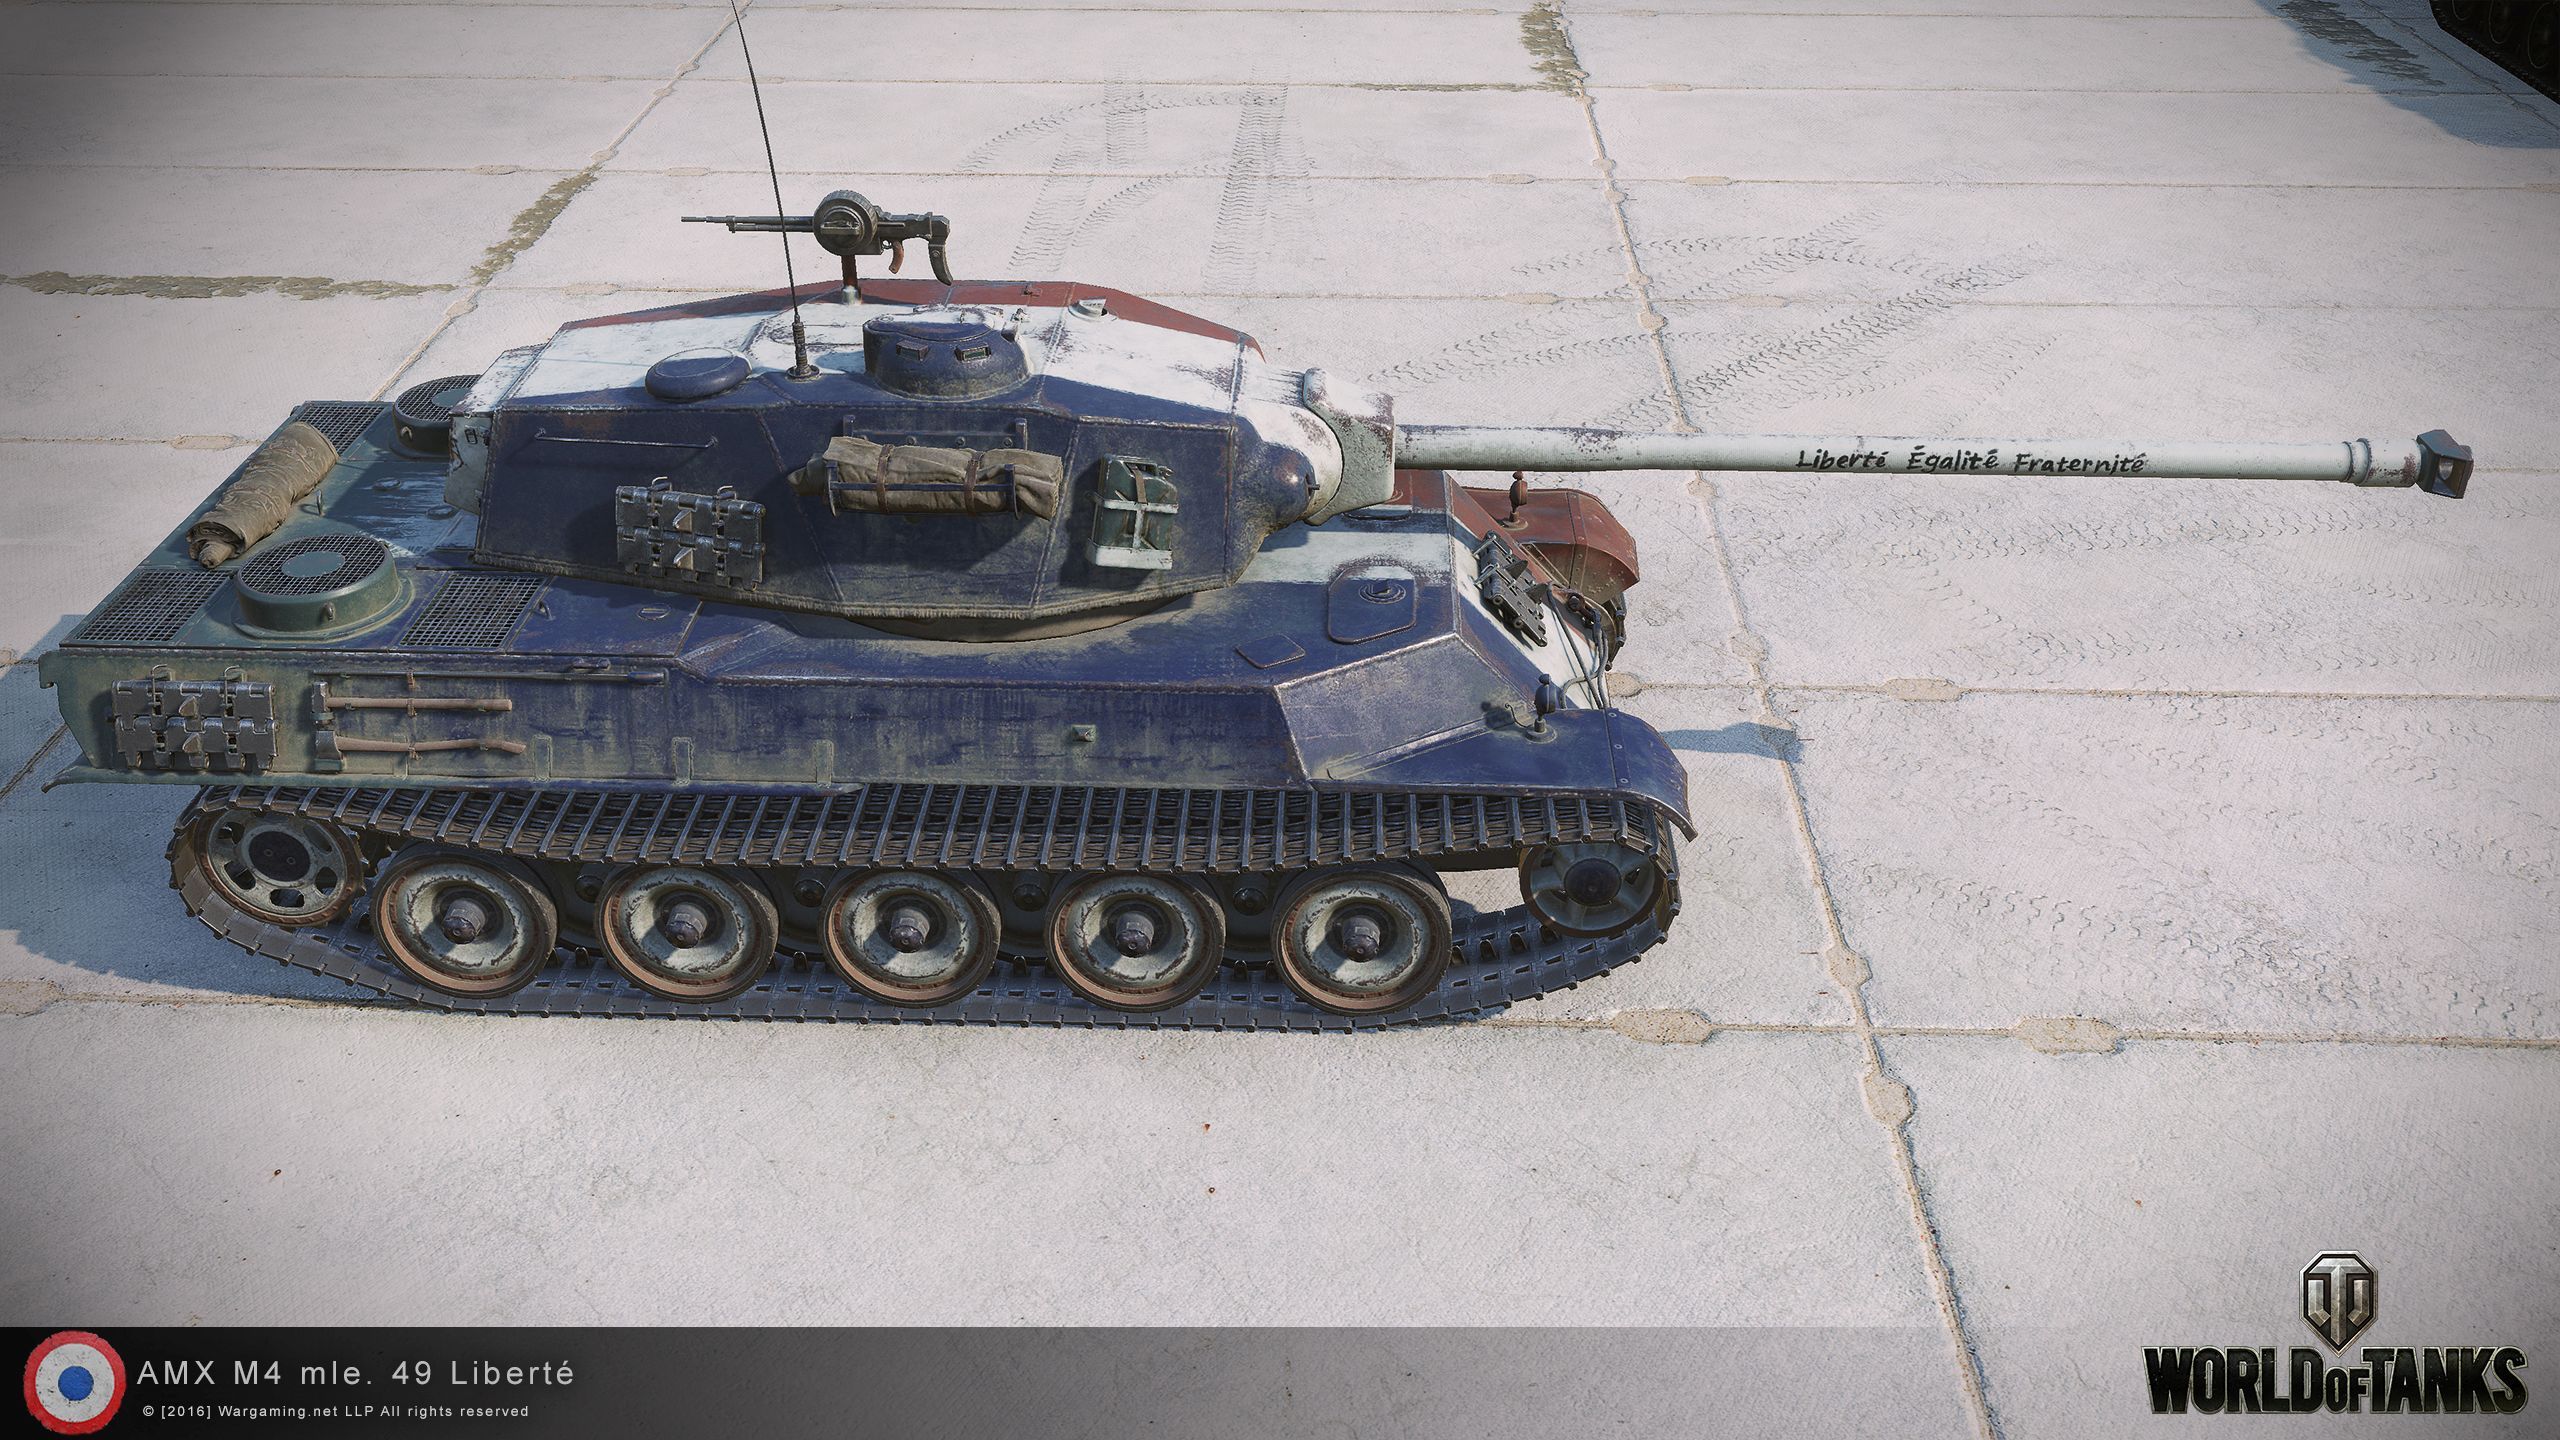 Not Your Typical French Heavy Amx M4 Mle 49 Liberte Premium Shop Offers World Of Tanks